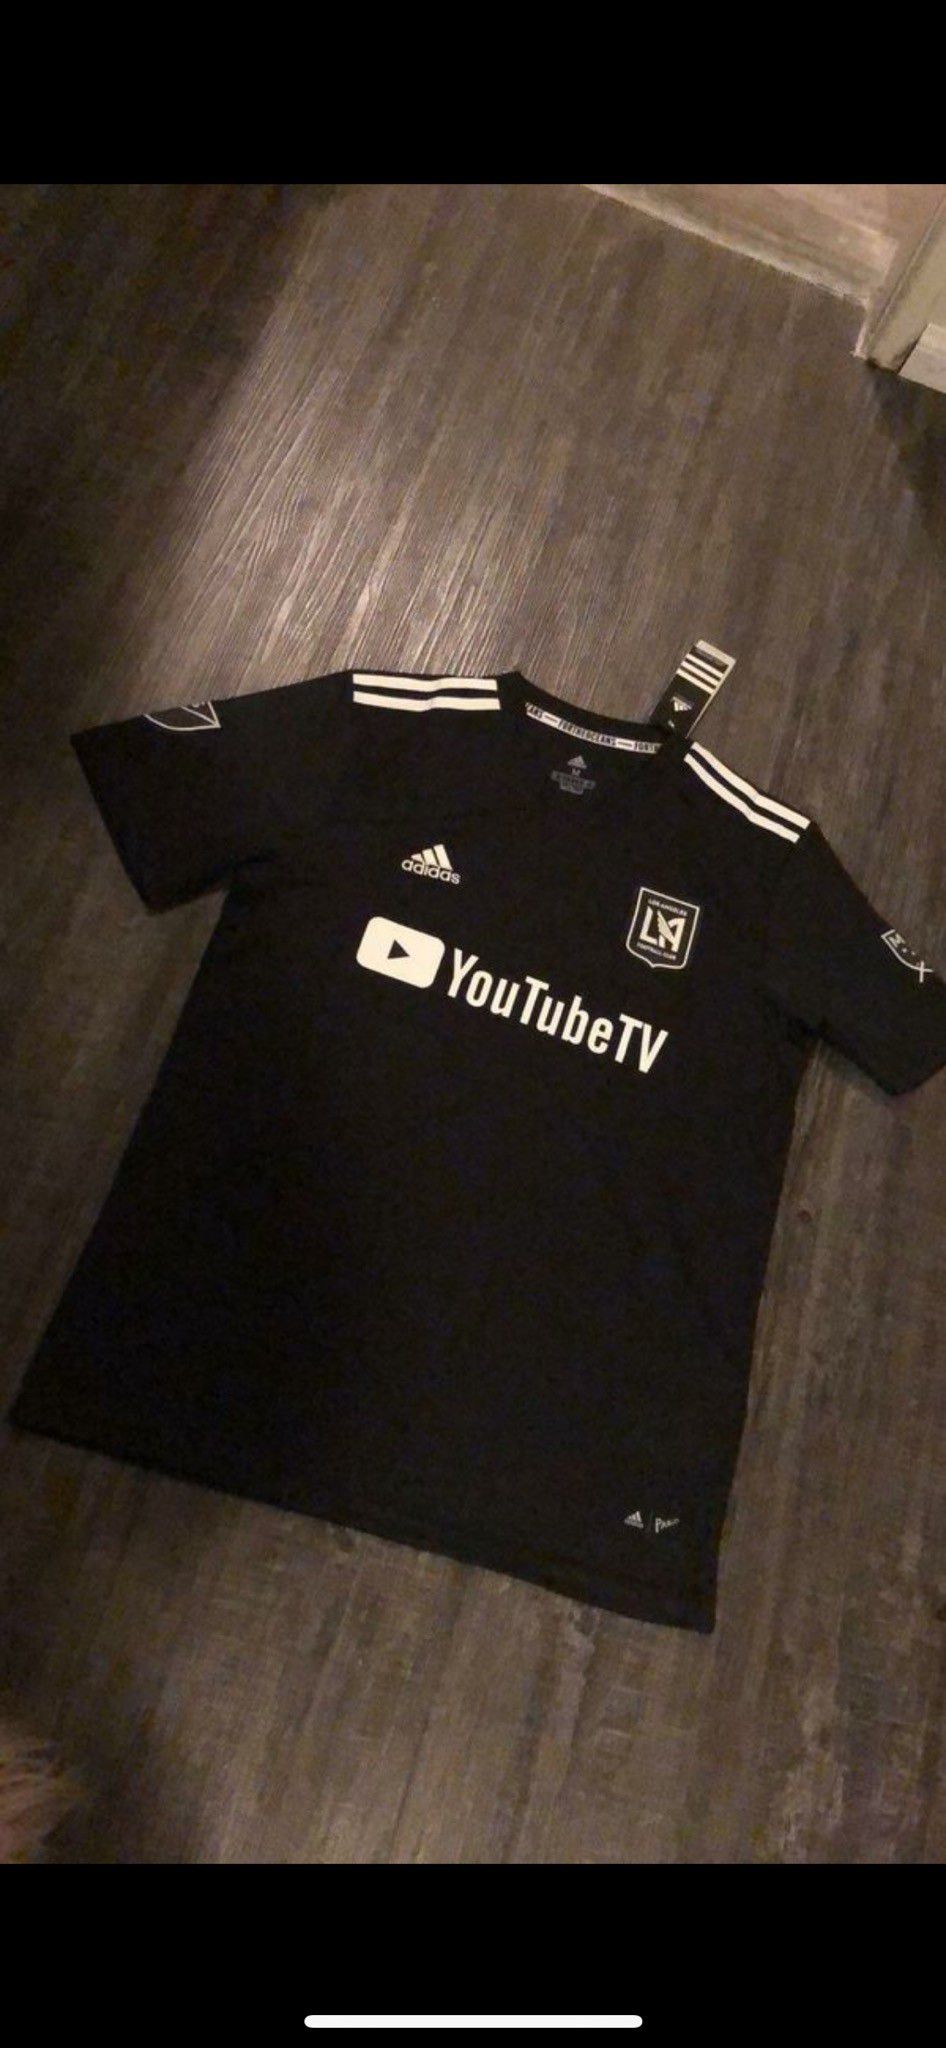 LAFC Vela parley jersey 2018 for Sale in Compton, CA - OfferUp